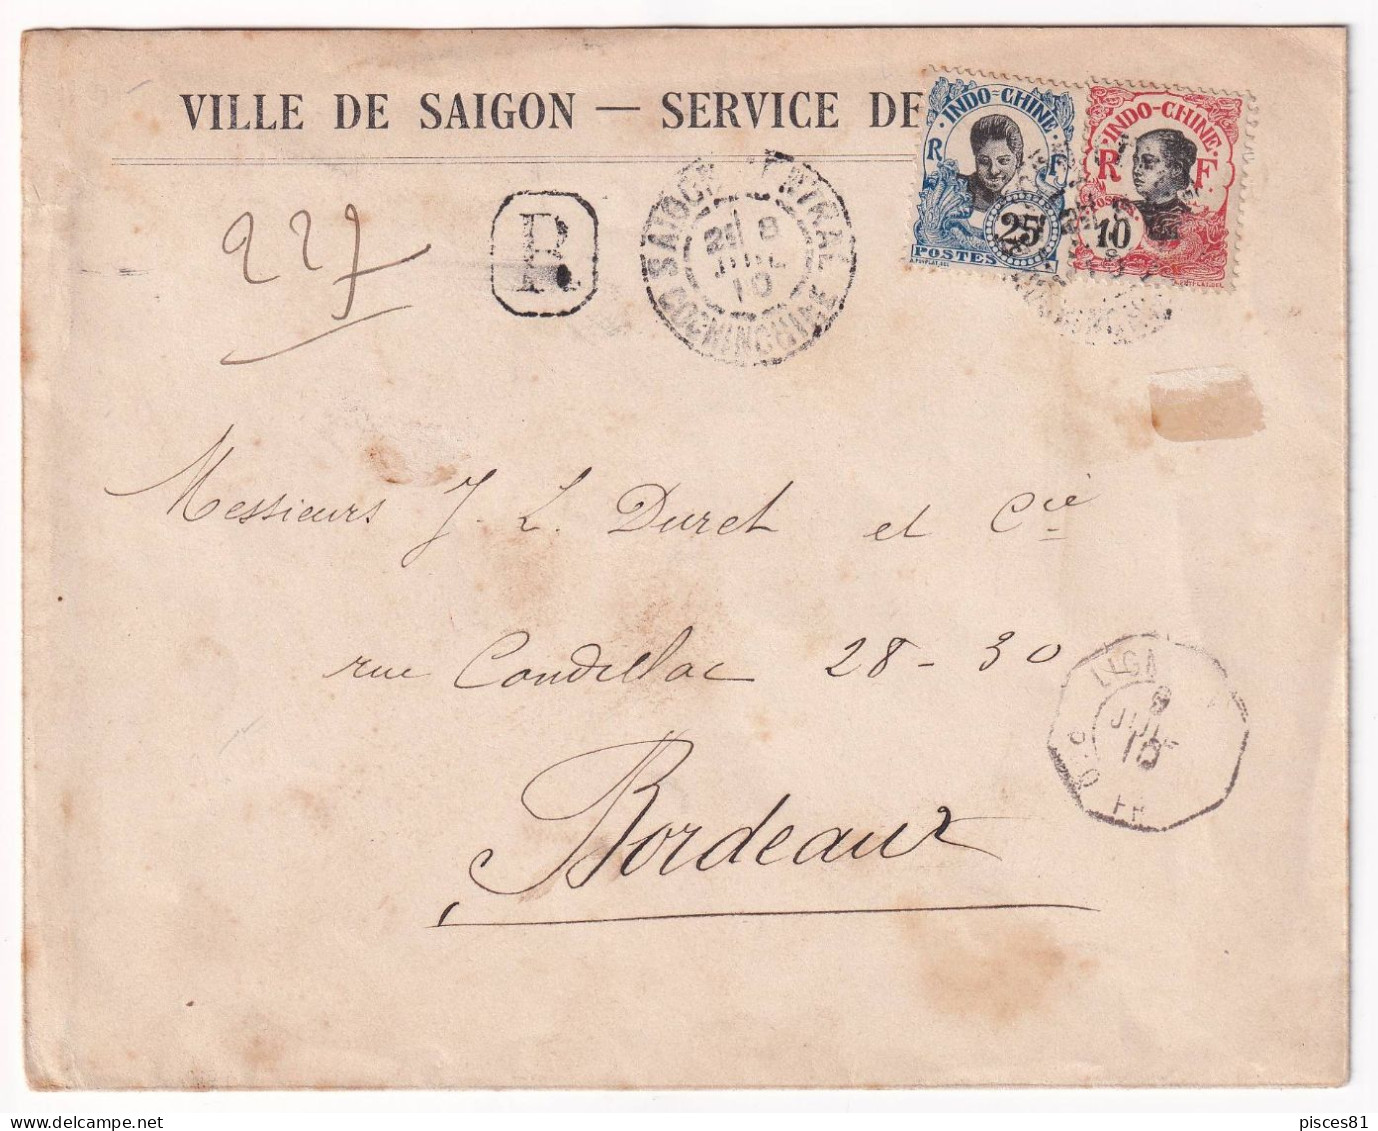 1910 Indochine Registered Cover From SAIGON To BORDEAUX, Ligne N Paquebot - Covers & Documents